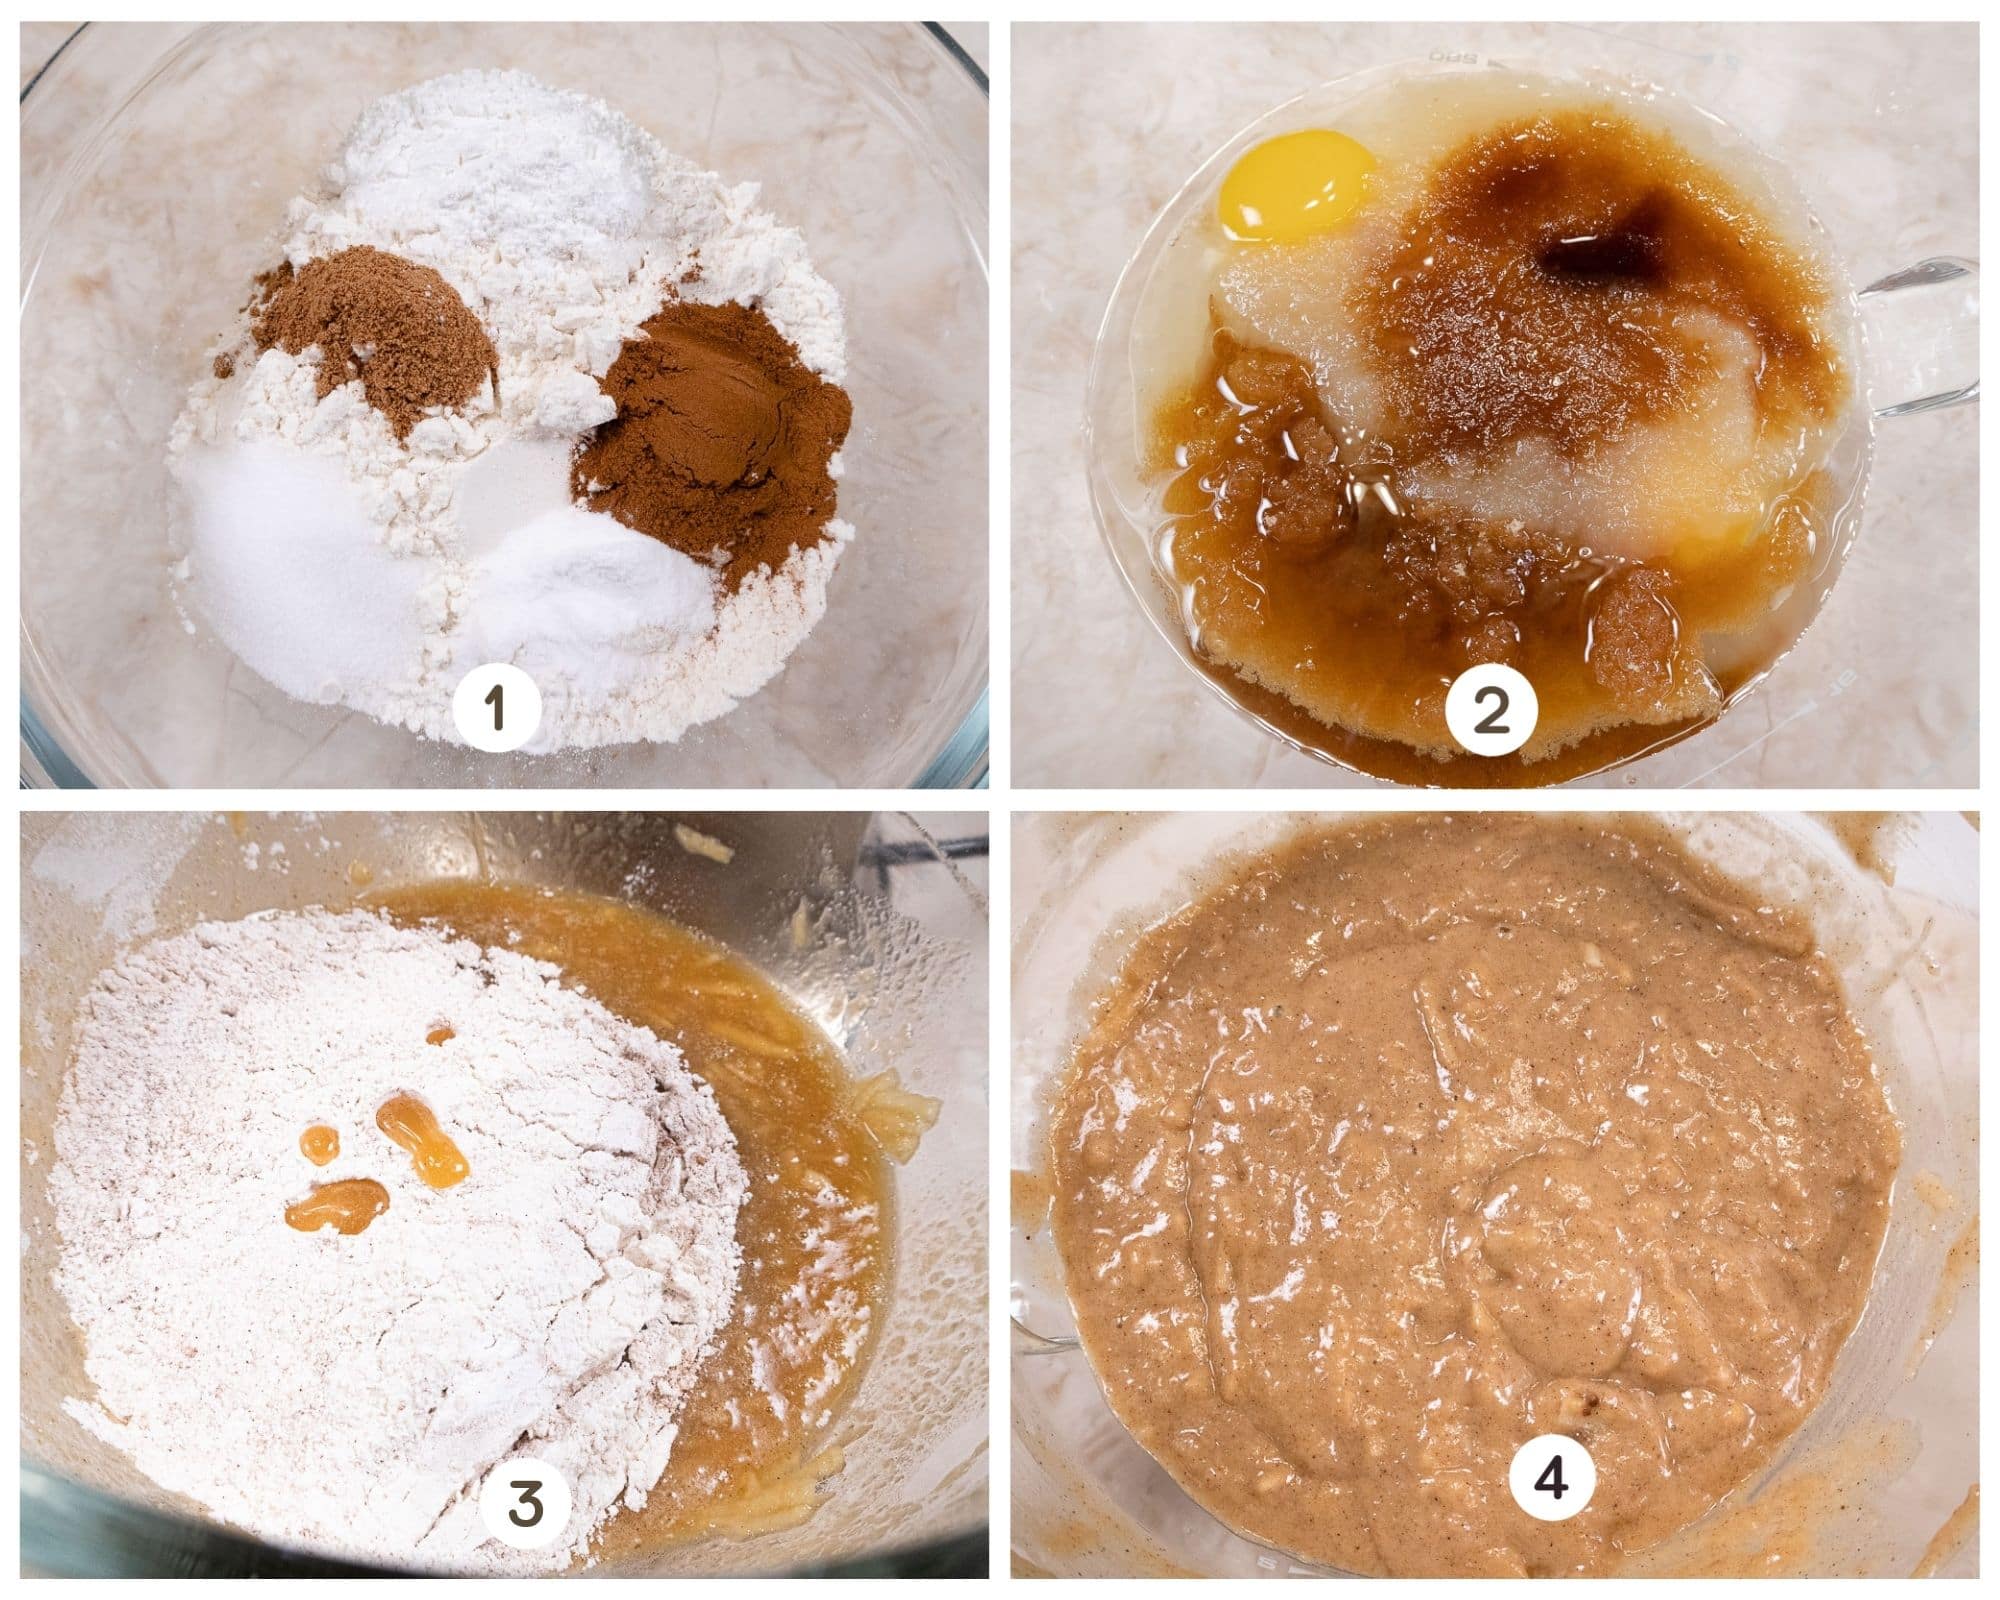 Four photos including dry ingredients, liquid ingredients, flour over wet ingredients, ingredients mixed.